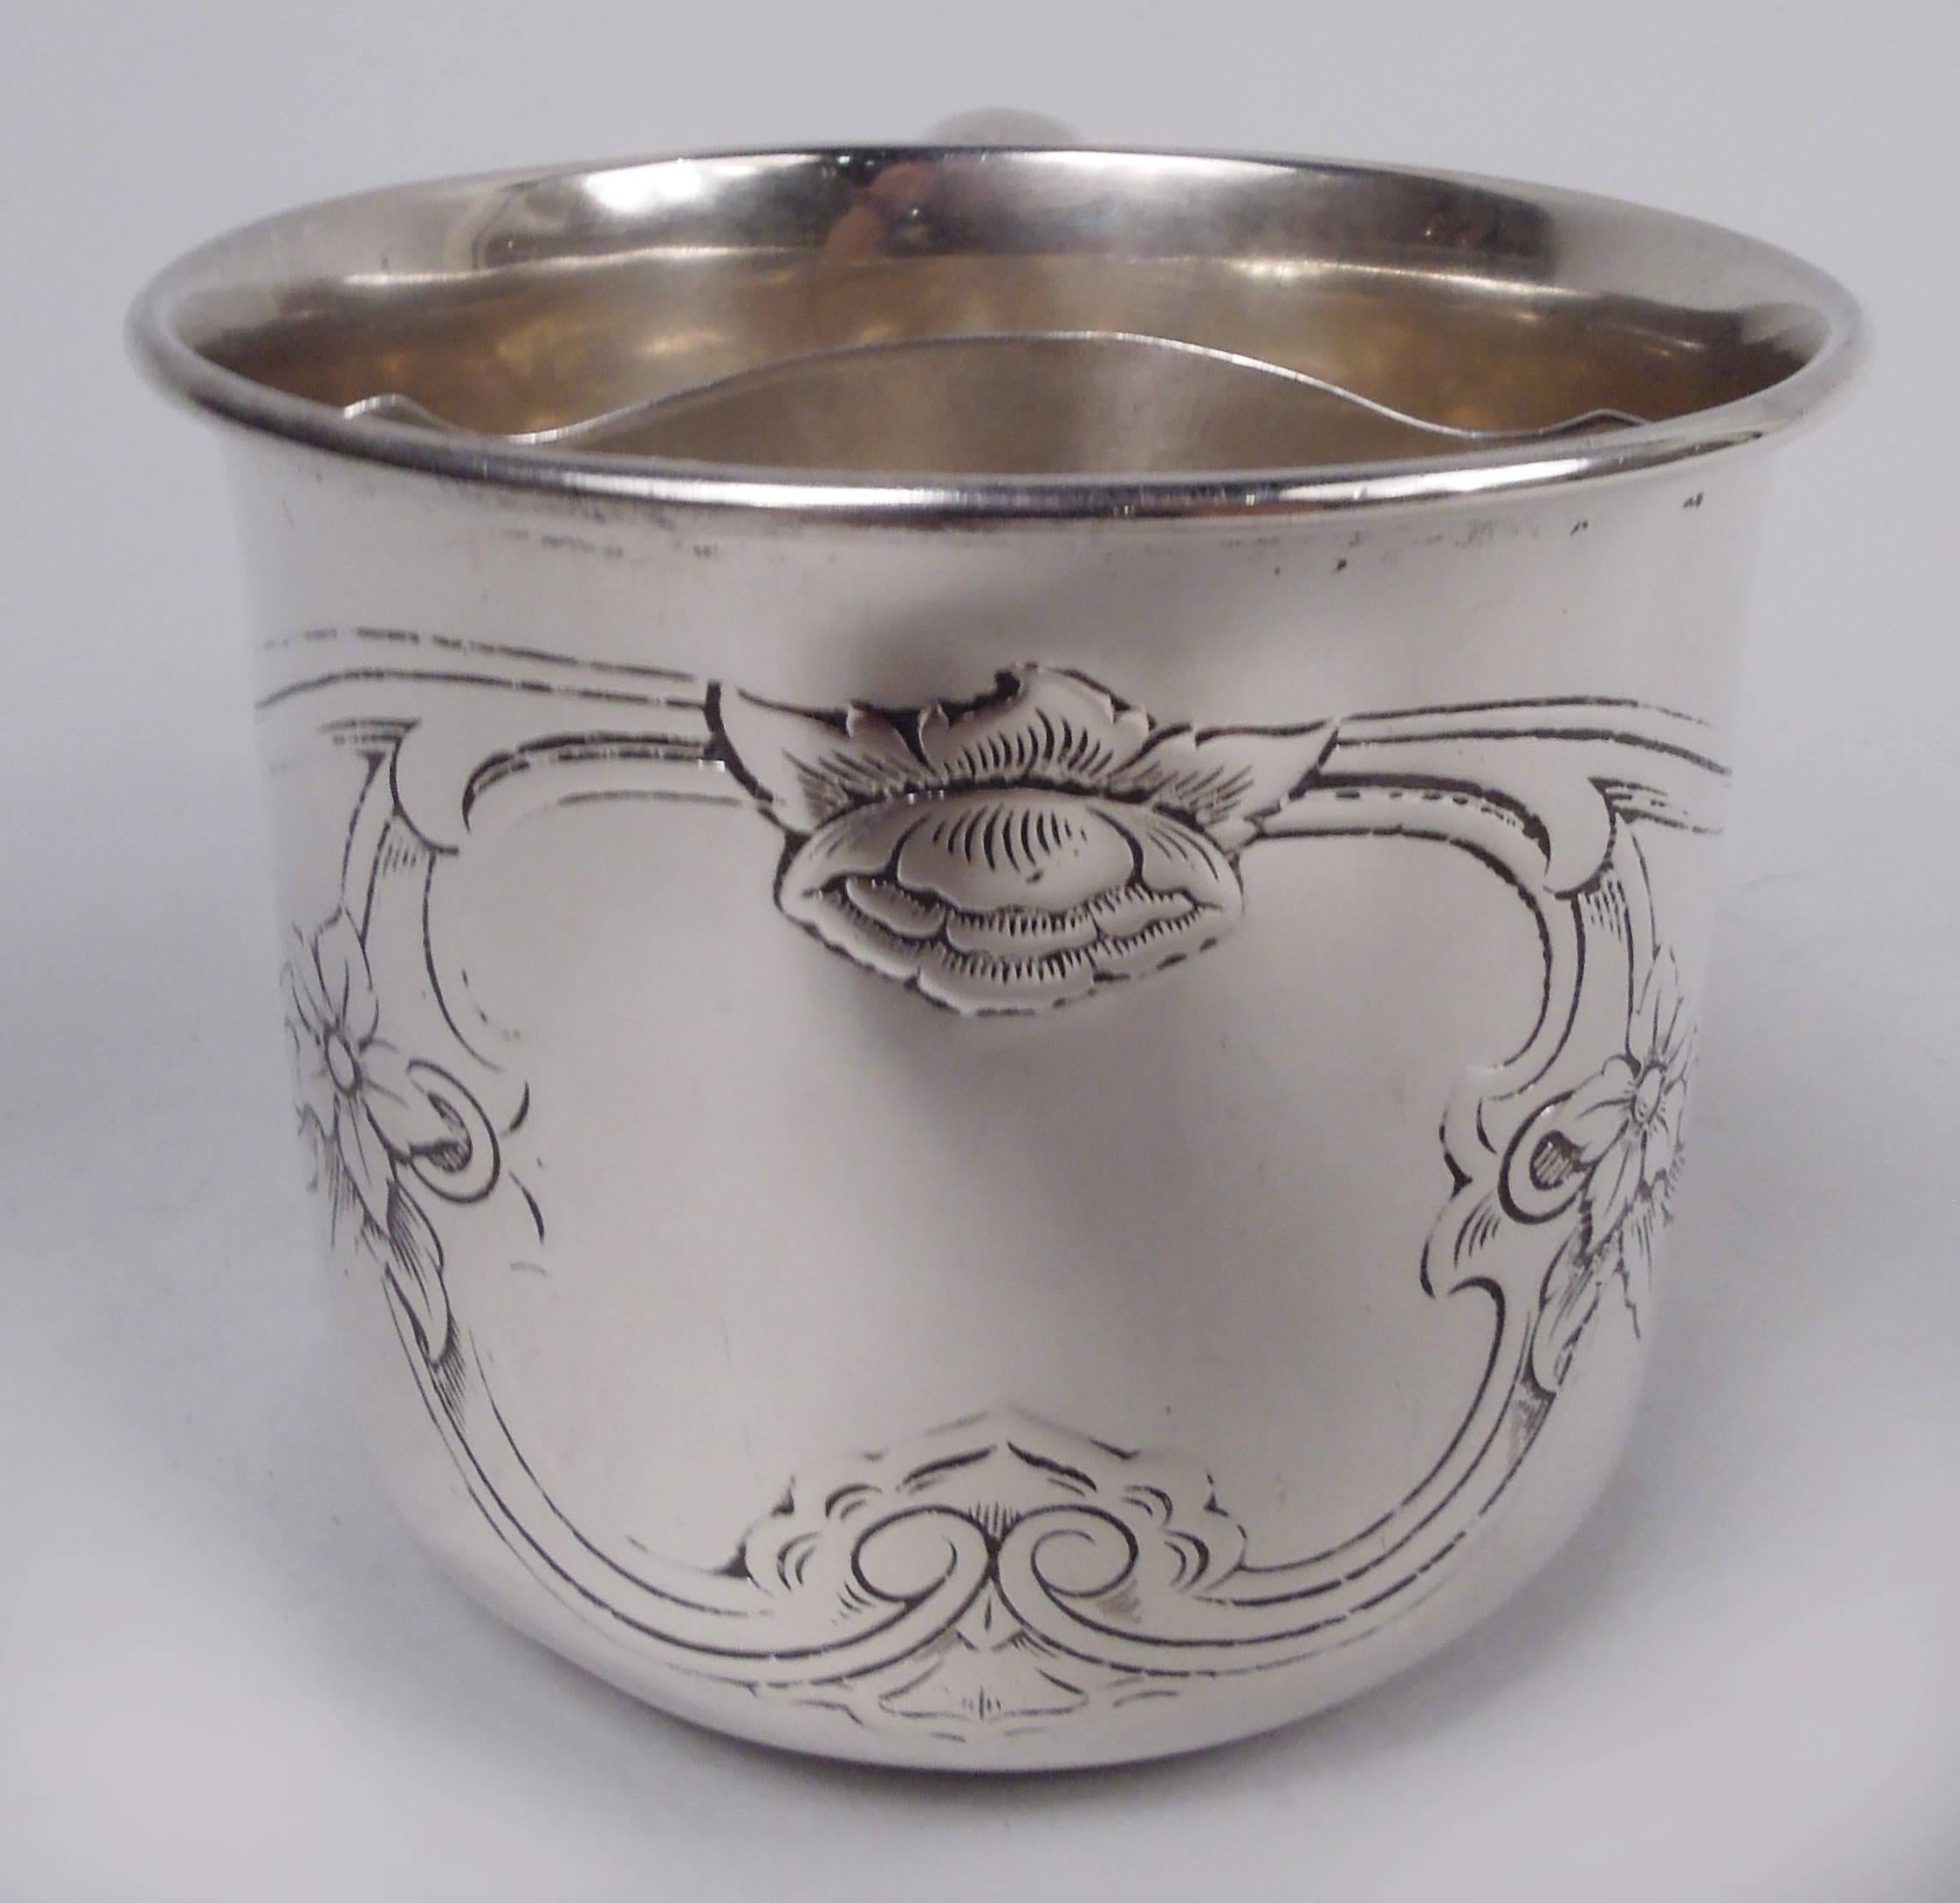 Art Nouveau sterling silver shaving mug. Made by Gorham in Providence, ca 1900. Round bowl; interior mounted with pierced brush holder. C-scroll handle. Acid-etched flowering scrollwork forming frame (vacant). Fully marked including maker’s stamp